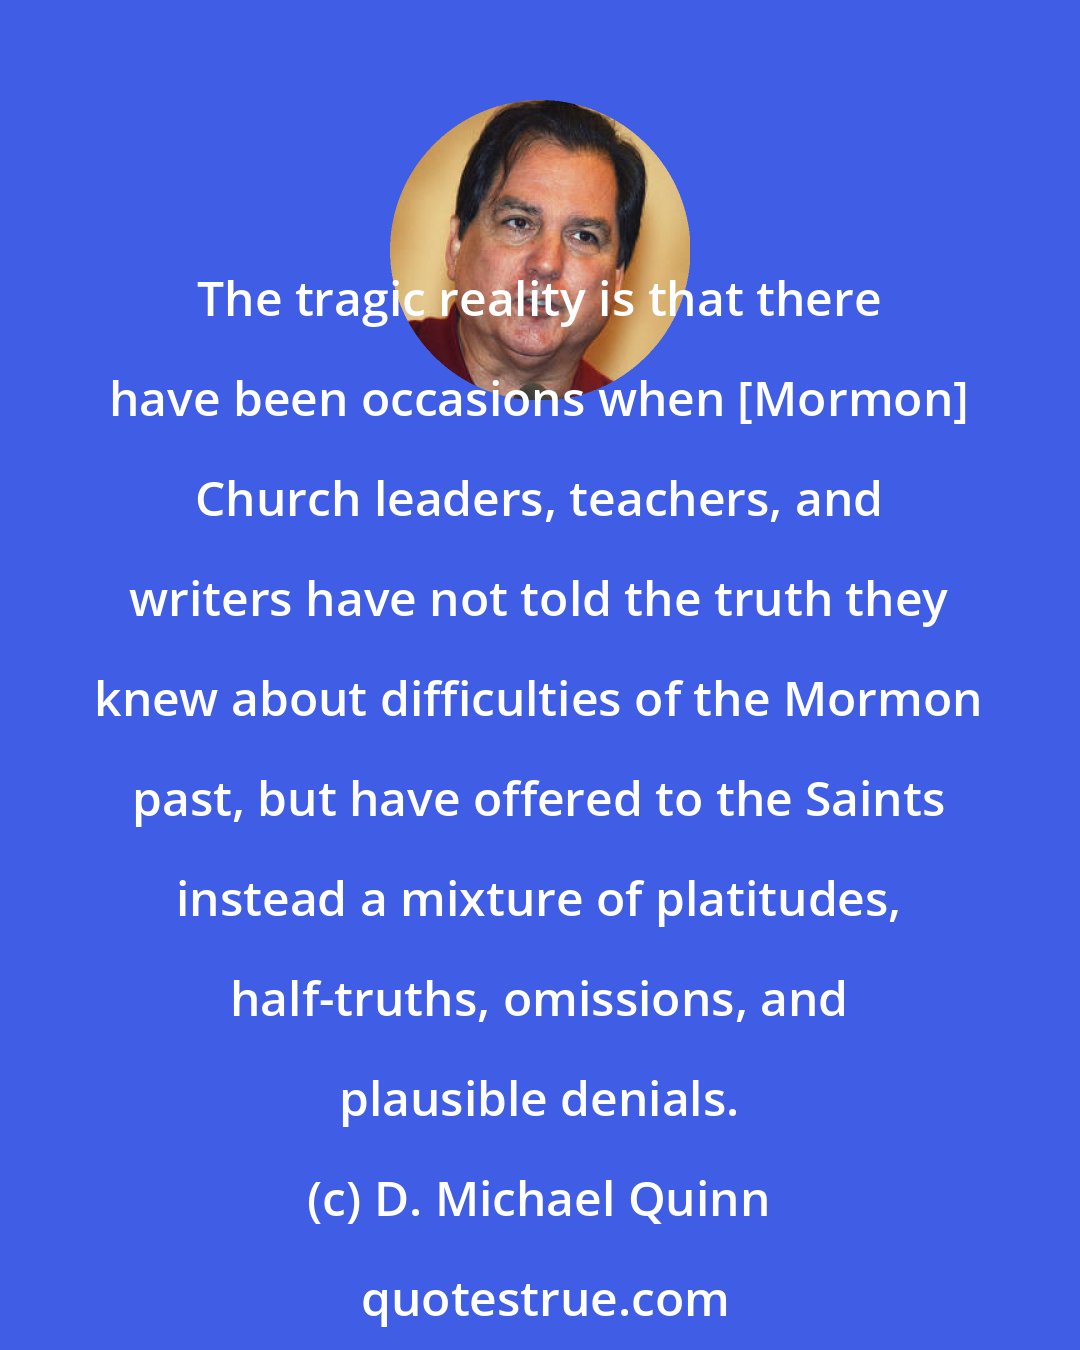 D. Michael Quinn: The tragic reality is that there have been occasions when [Mormon] Church leaders, teachers, and writers have not told the truth they knew about difficulties of the Mormon past, but have offered to the Saints instead a mixture of platitudes, half-truths, omissions, and plausible denials.